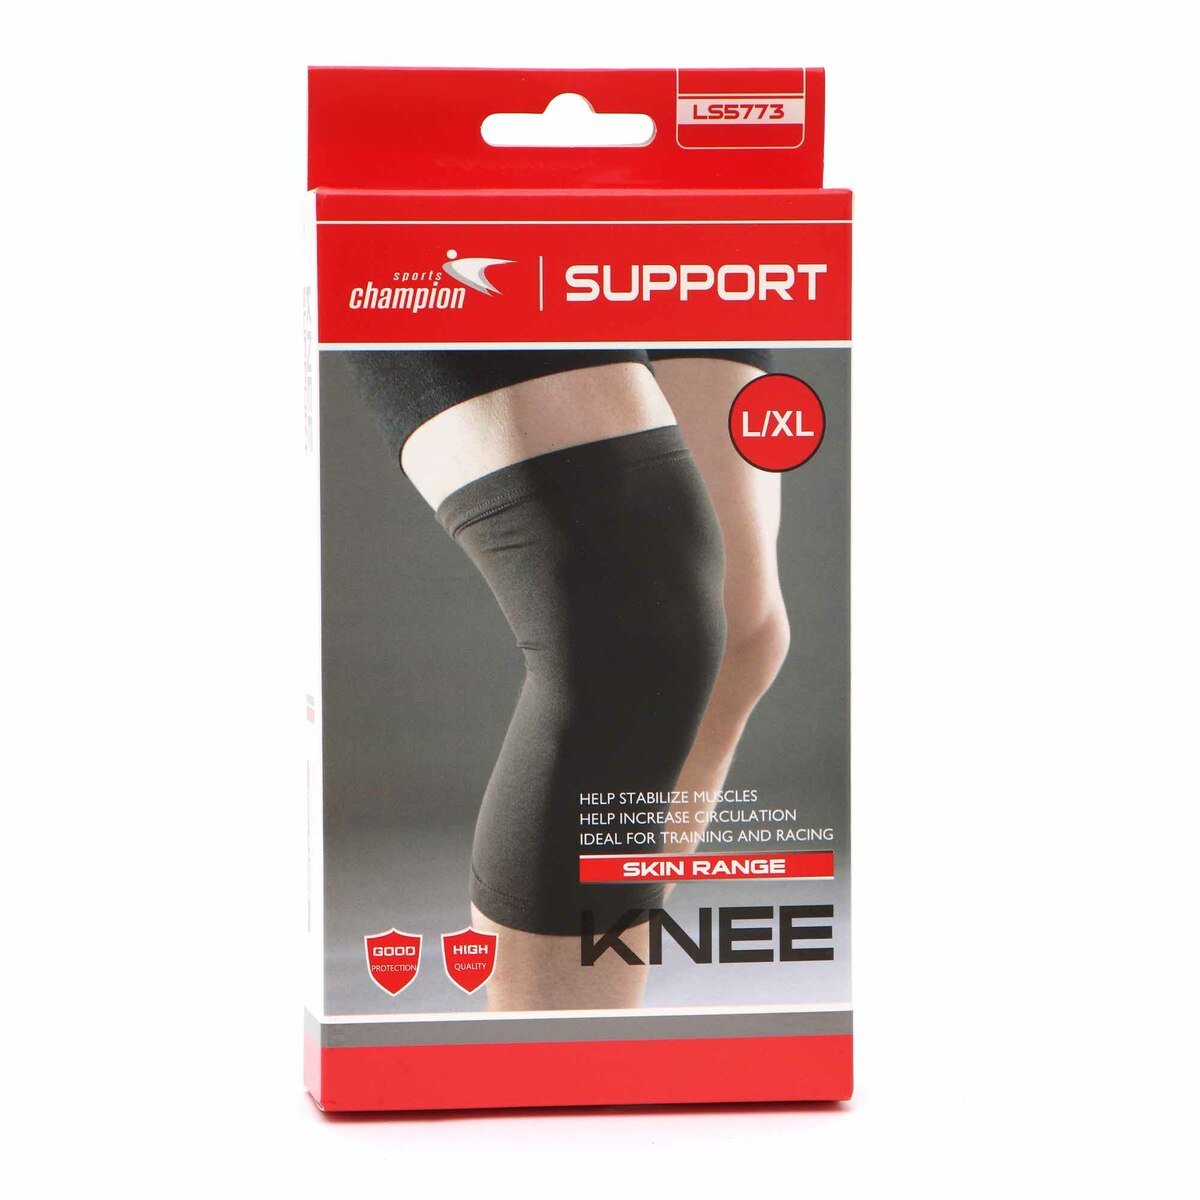 Get the Best Support for Sport